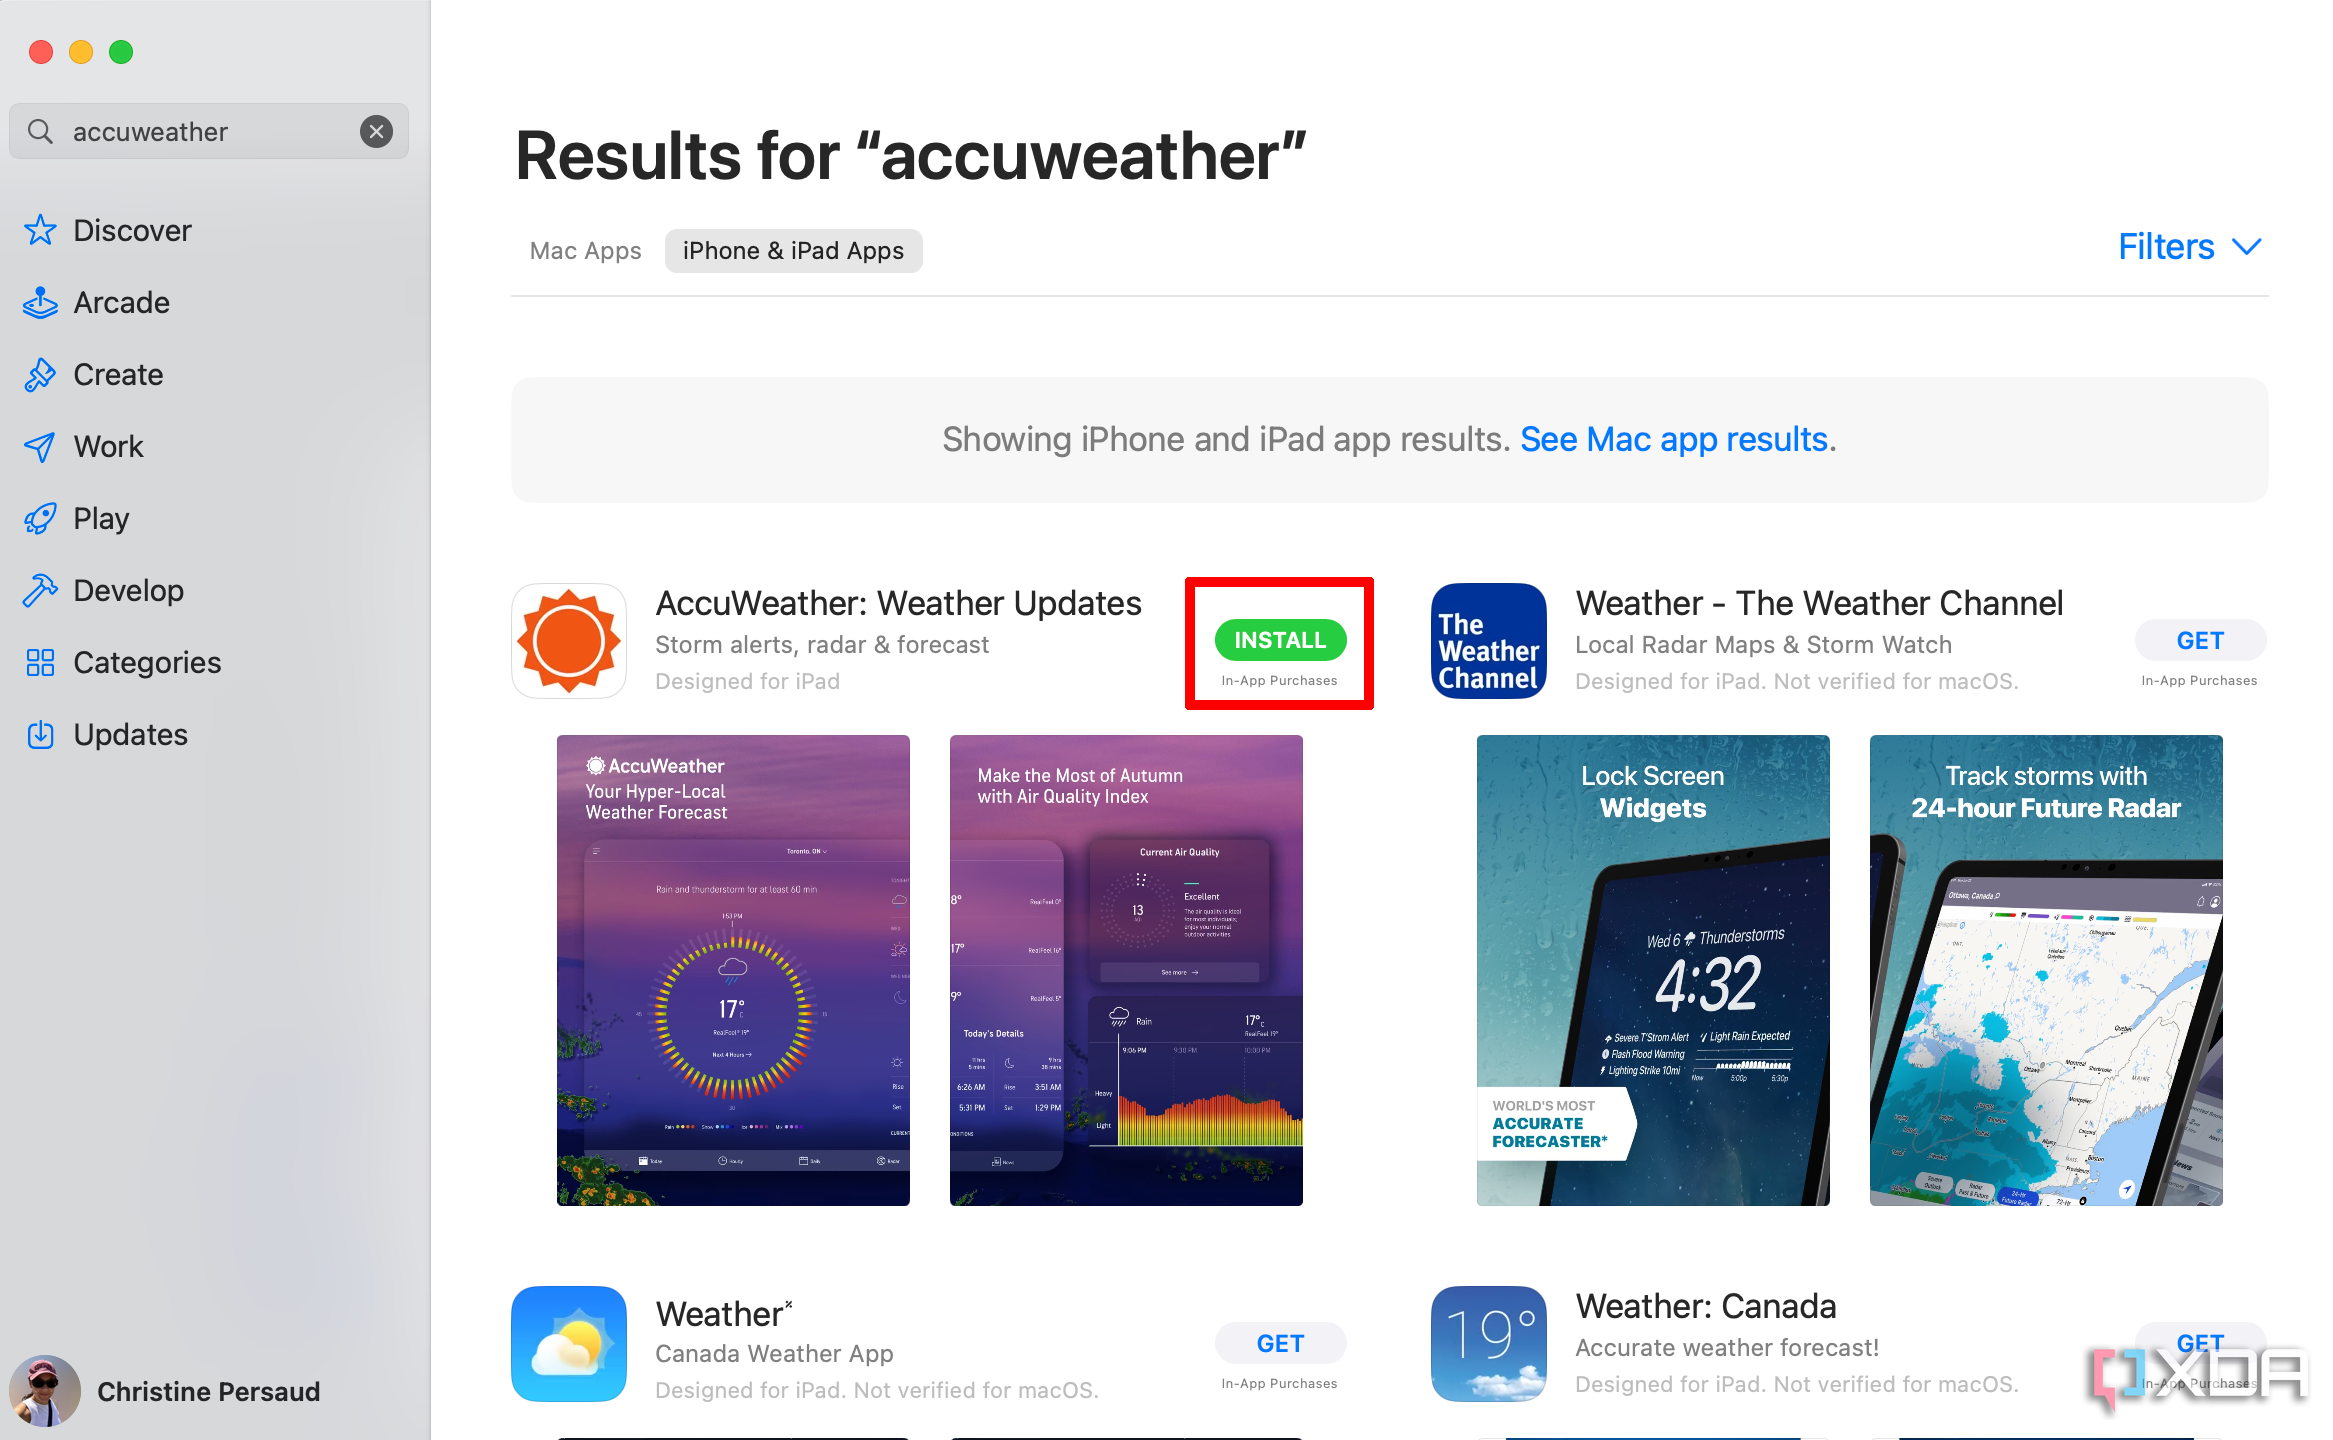 App Store app with the Accuweather app selected and Install showing.